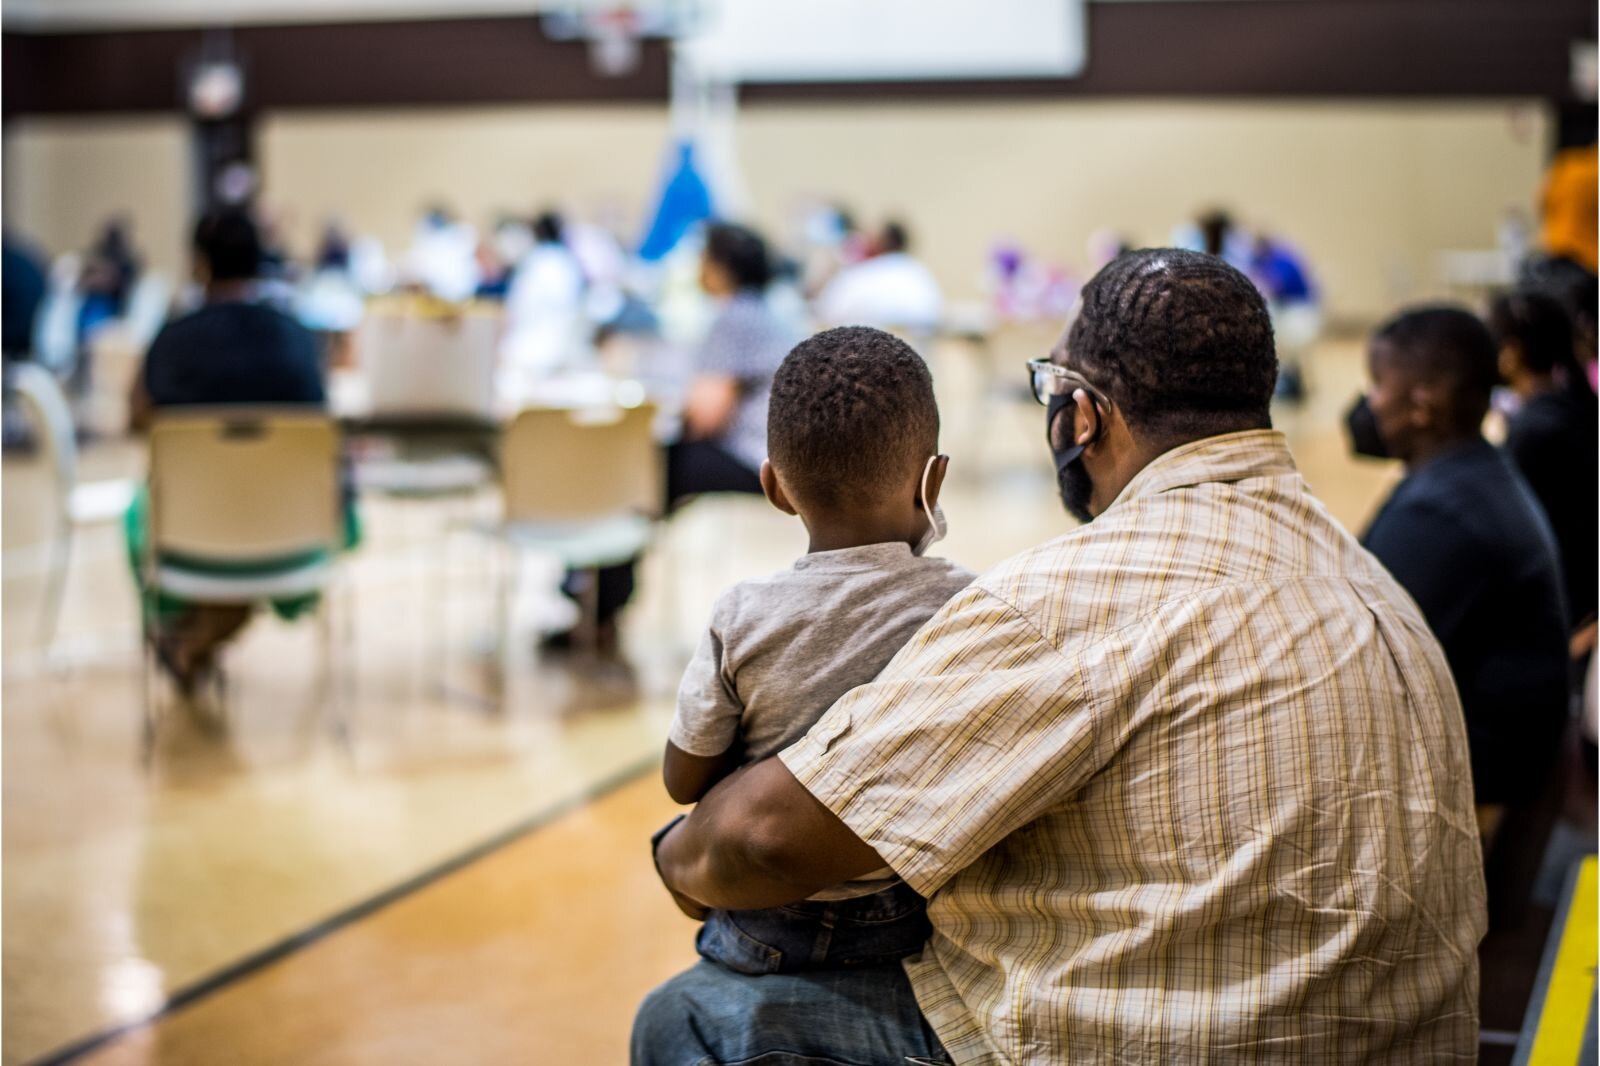 A man holds a little boy as they listen to plans for an affordable senior housing complex on July 21, 2022 at Mt. Zion Baptist Church.